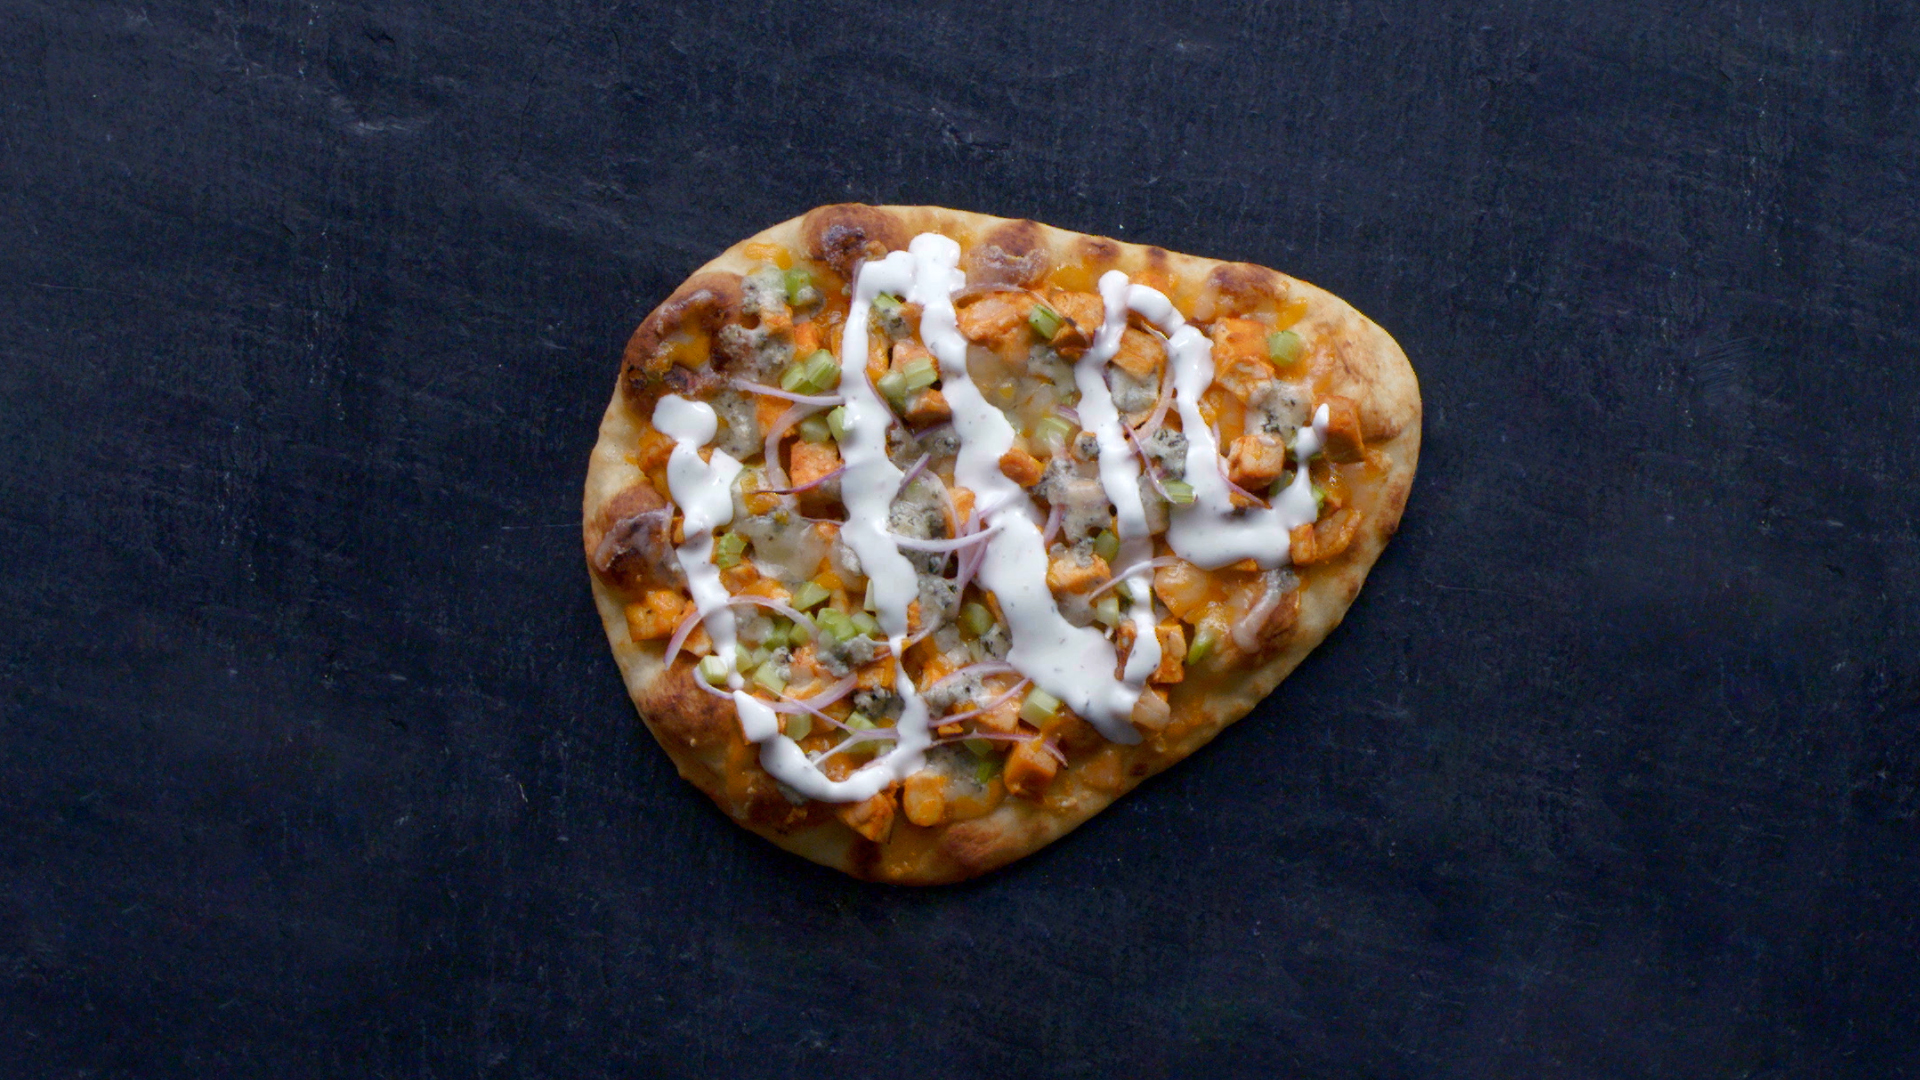 buffalo chicken naan pizza - Alisons Pantry Delicious Living Blog